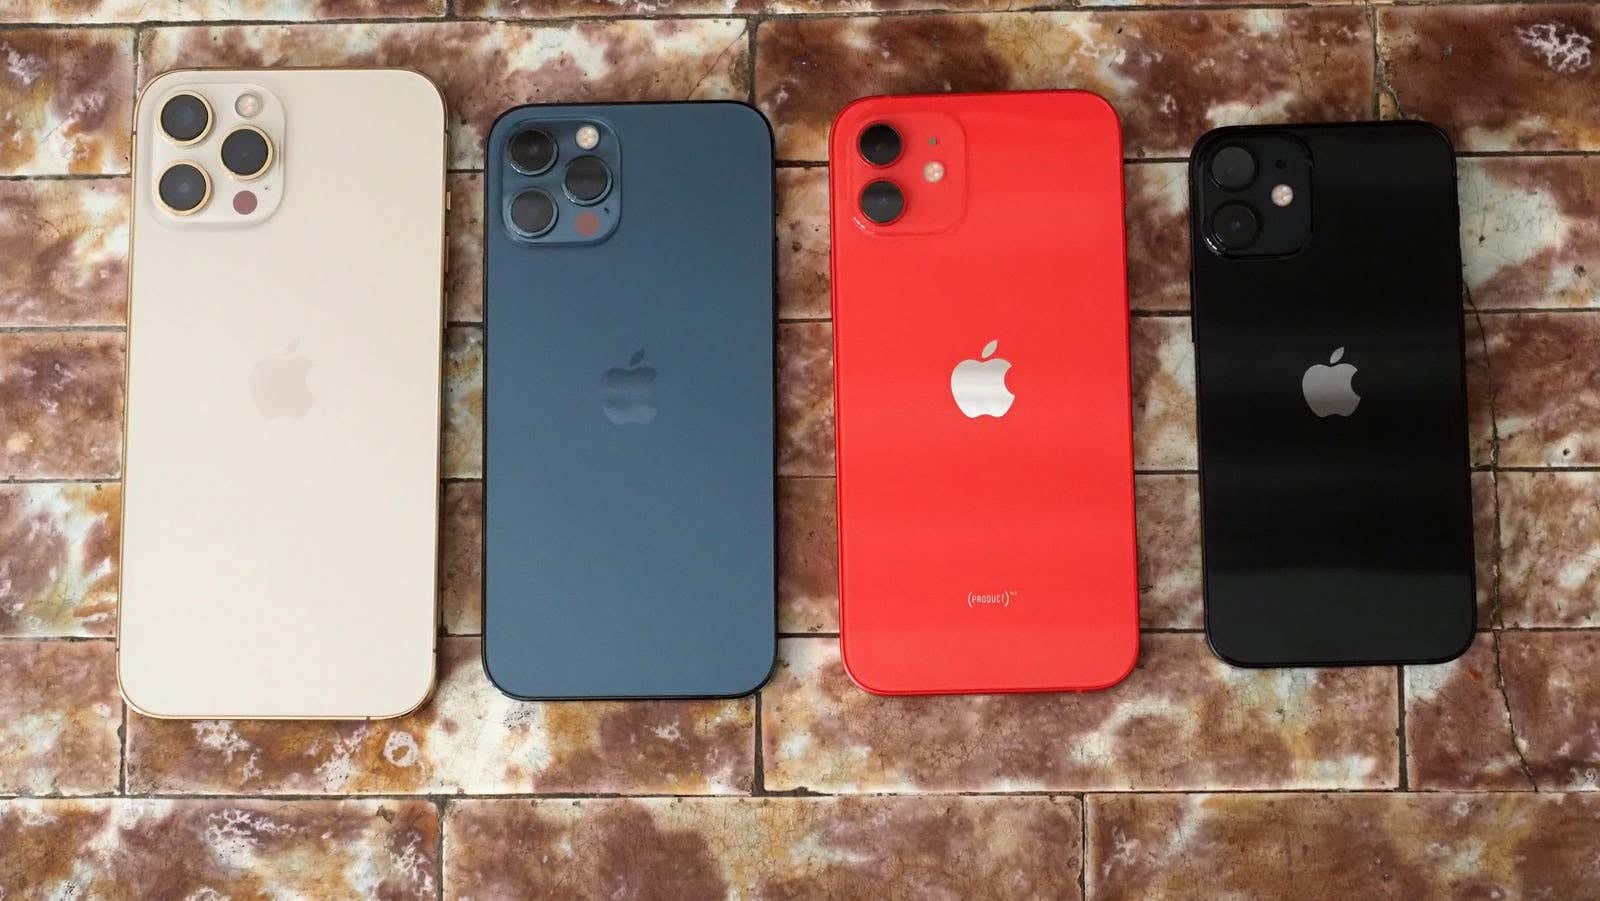 The iPhone 13 is also expected to have four models in the same sizes as the iPhone 12. (Photo: Caitlin McGarry/Gizmodo)